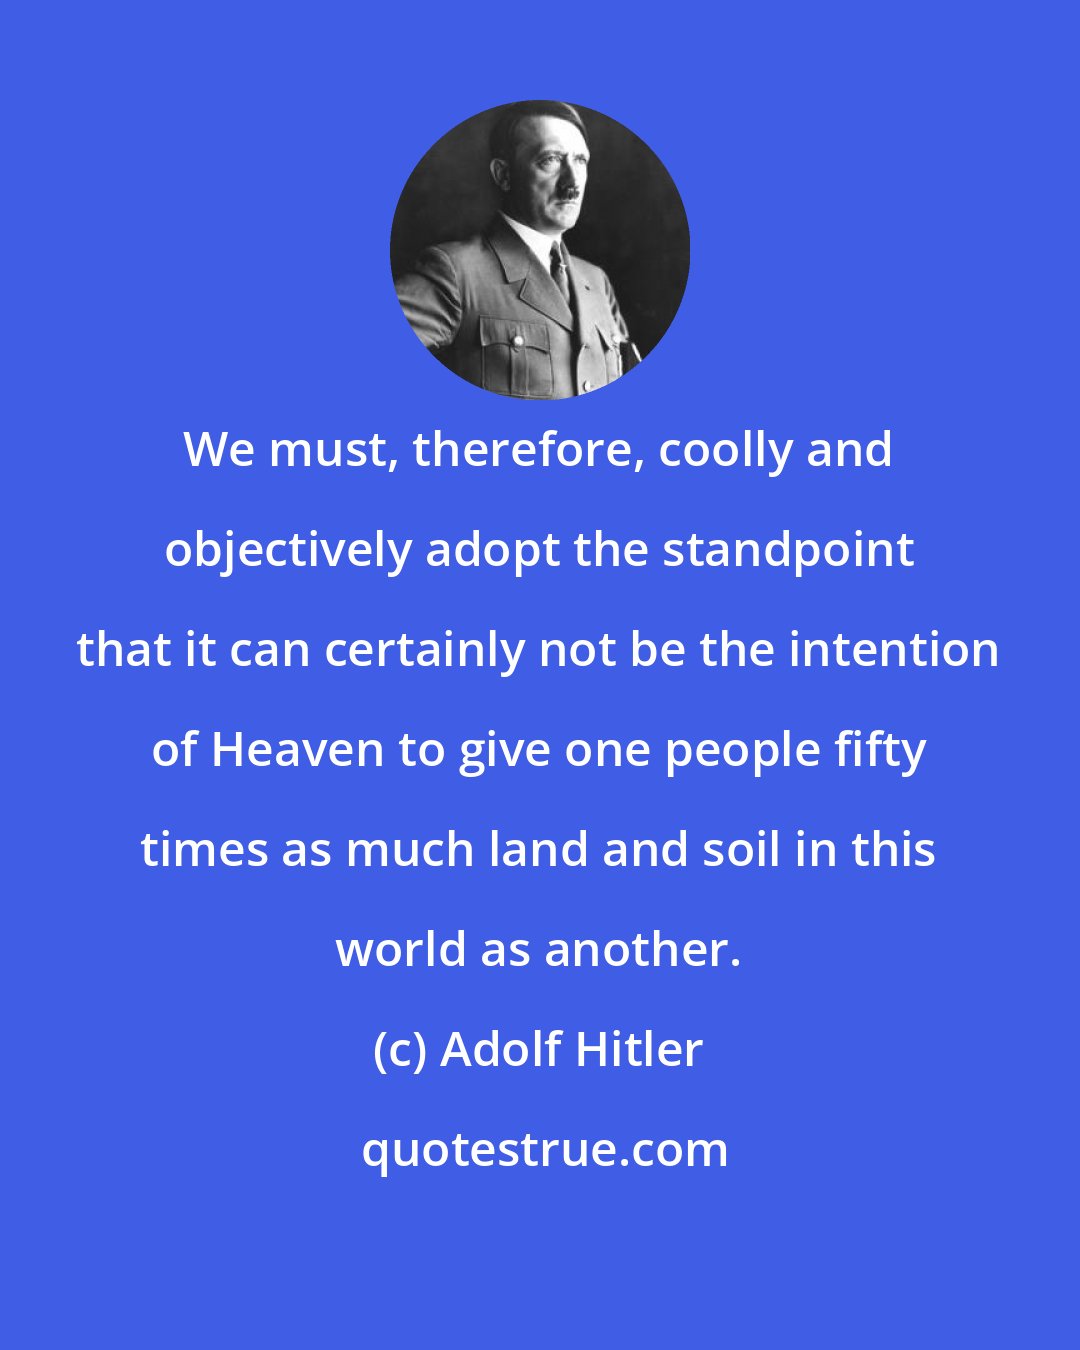 Adolf Hitler: We must, therefore, coolly and objectively adopt the standpoint that it can certainly not be the intention of Heaven to give one people fifty times as much land and soil in this world as another.